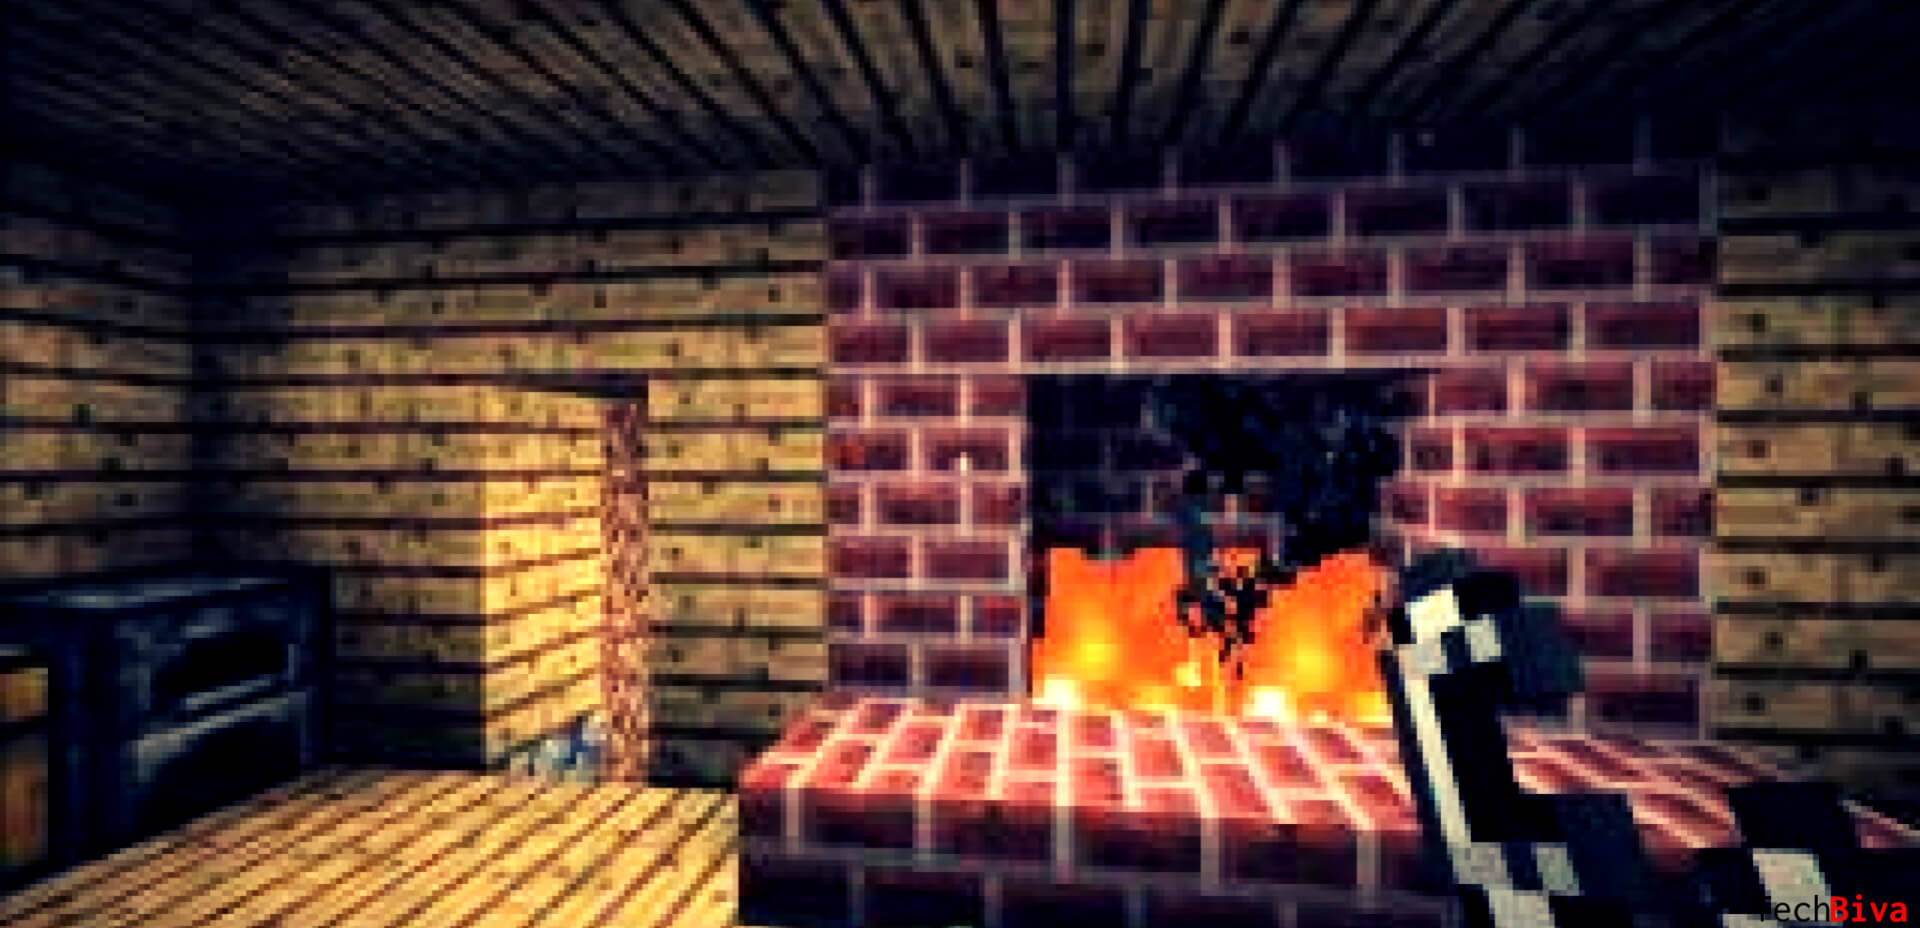 Making A Fireplace Without Burning Your House In Minecraft